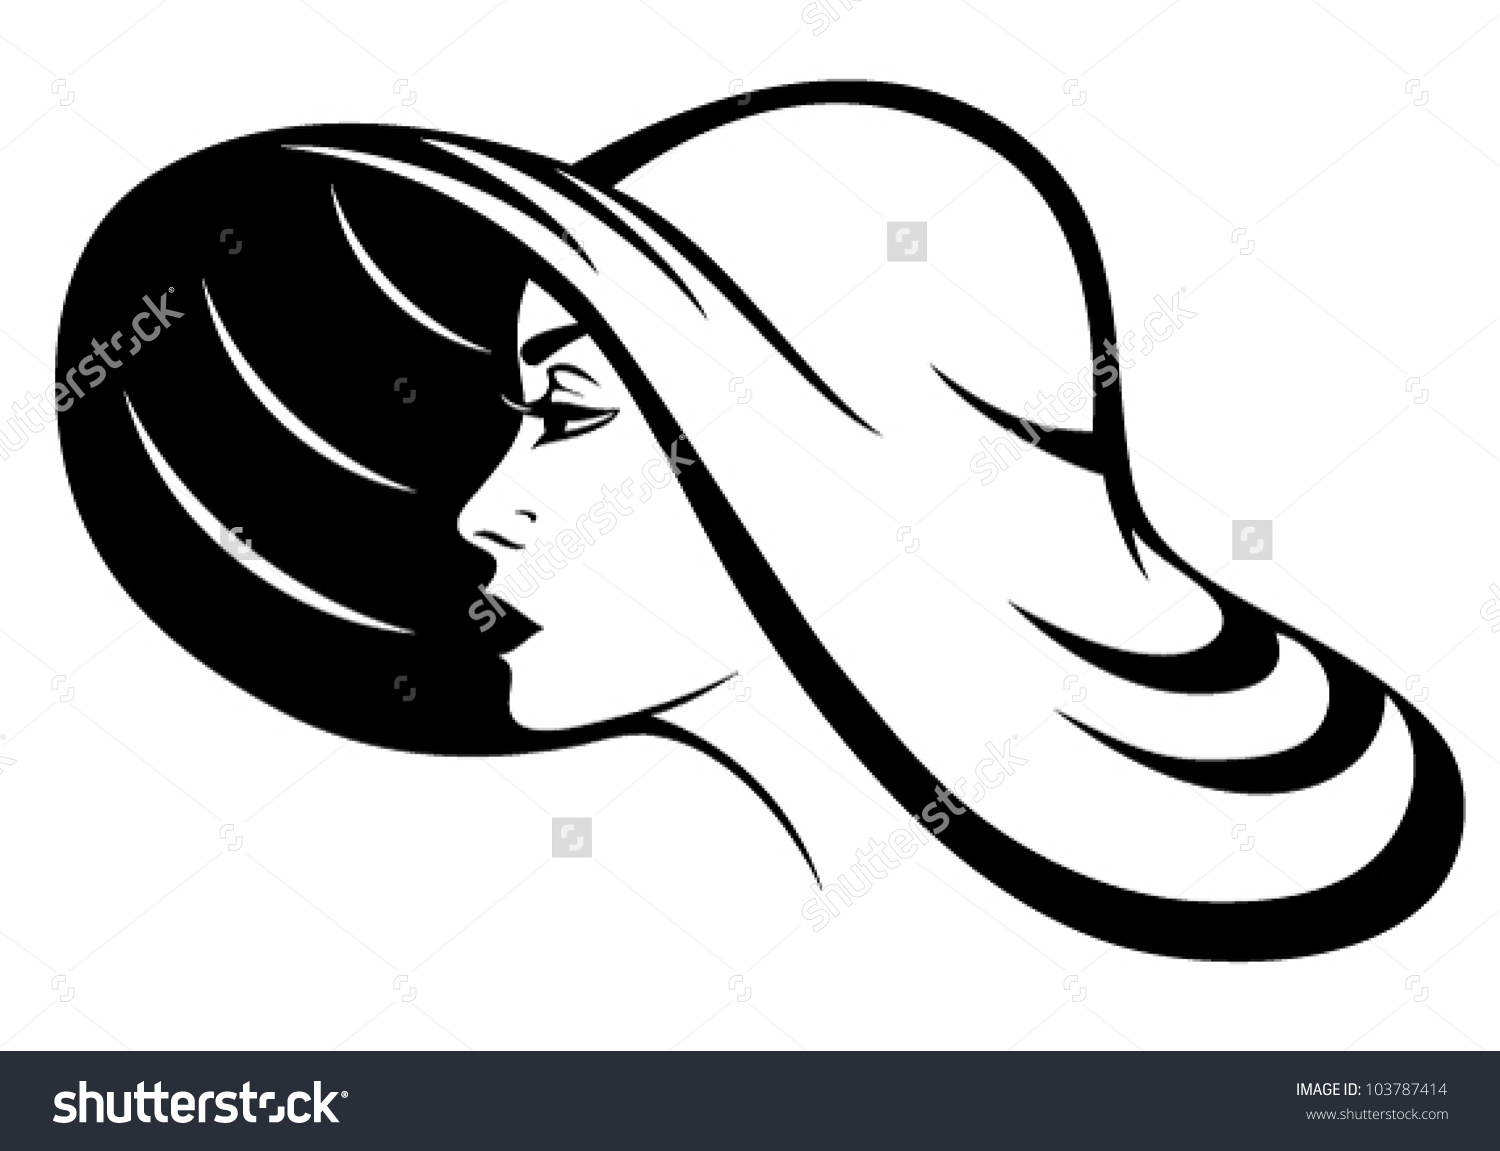 Wide brimmed hat clipart black and white.